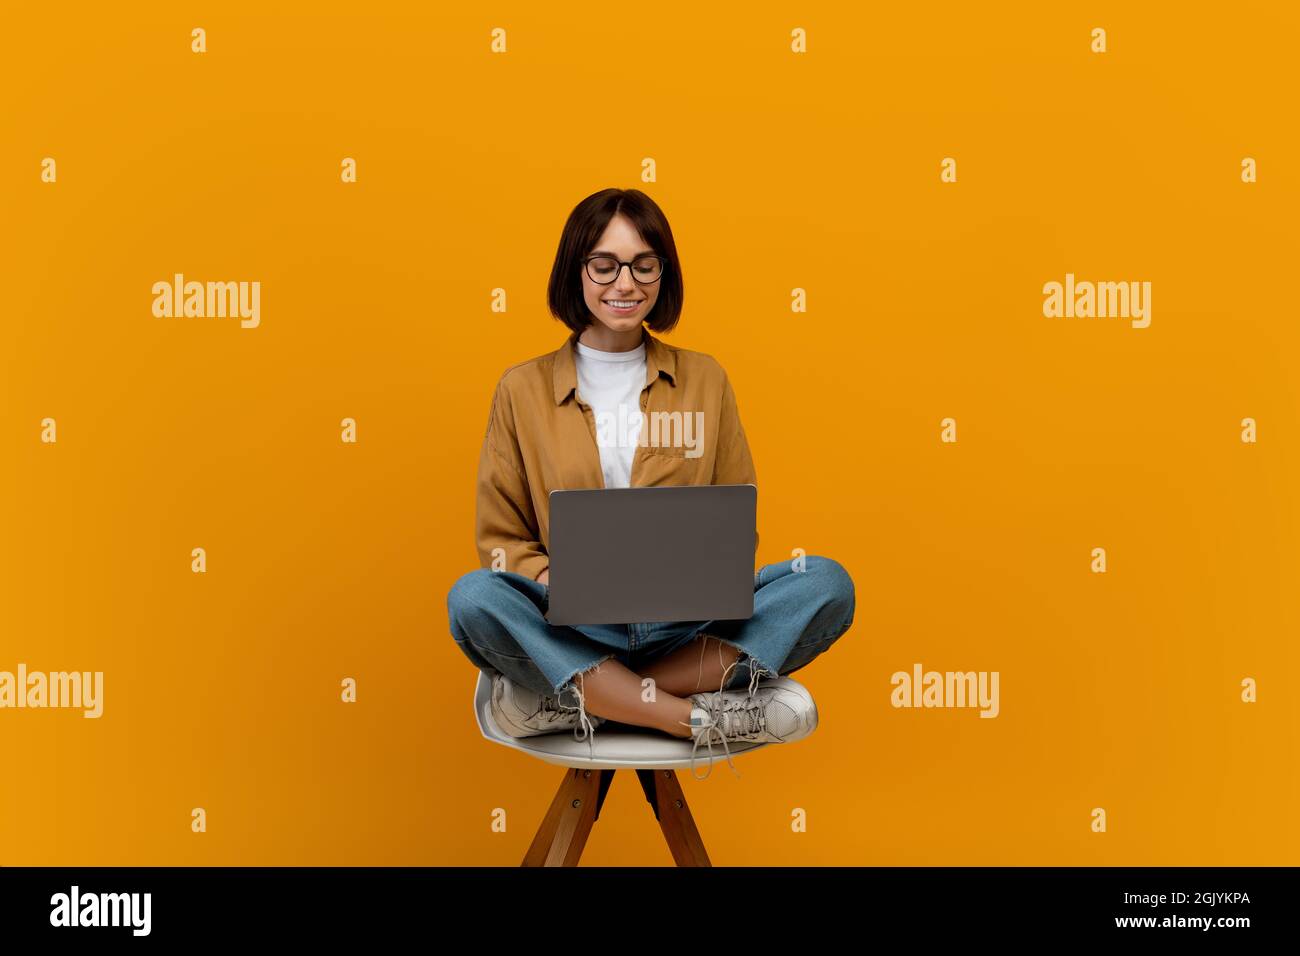 E-learning concept. Female student using laptop computer while sitting in chair over yellow background, copy space Stock Photo